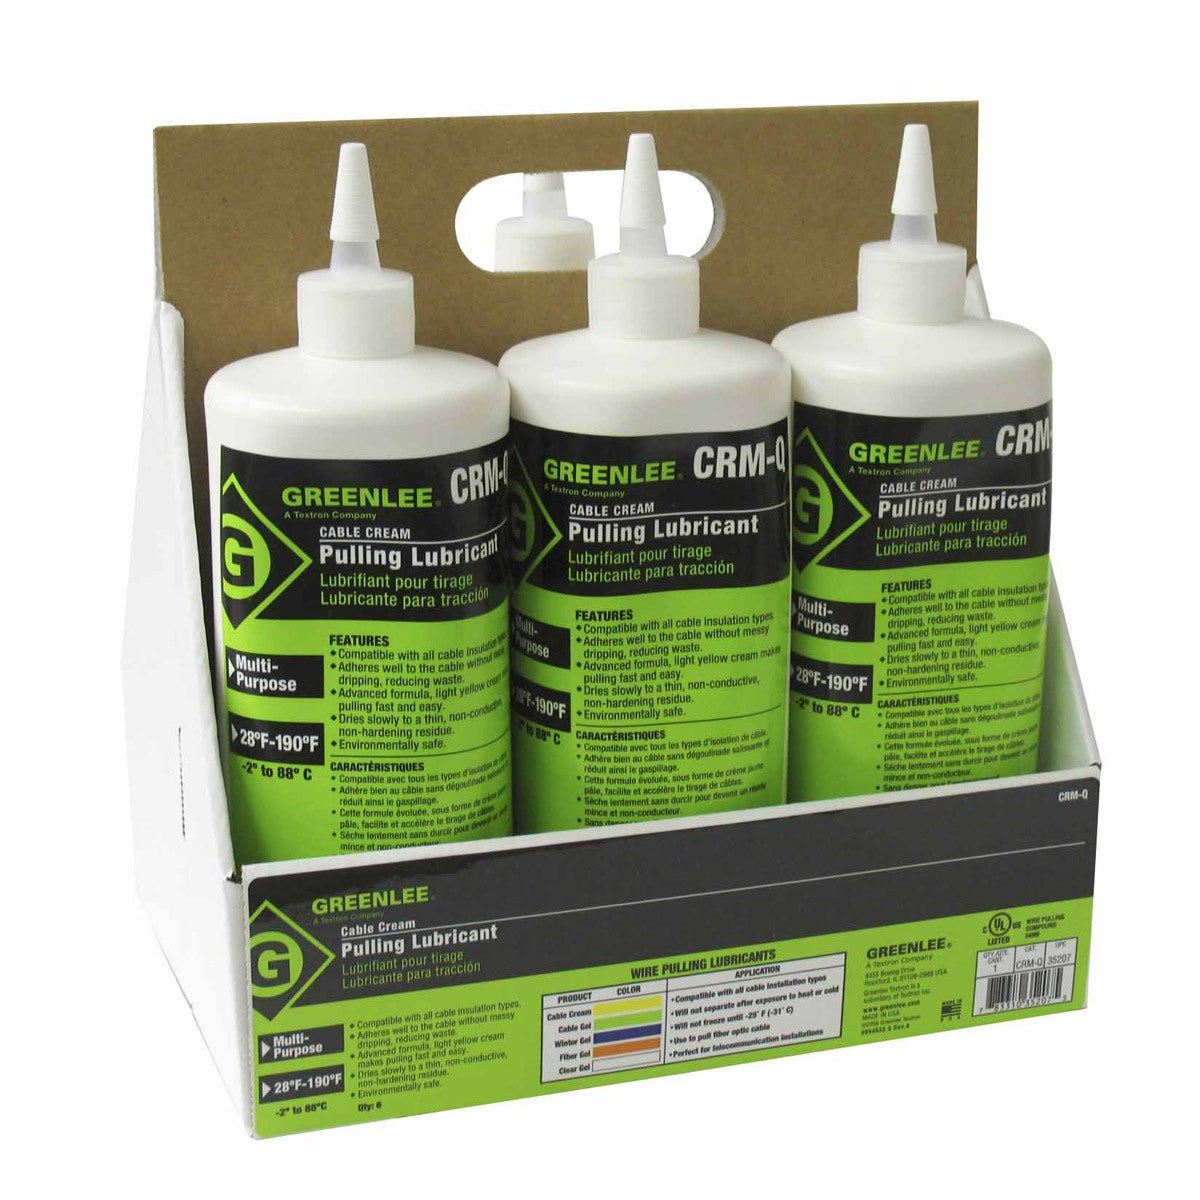 Greenlee CRM-Q Cable-Cream Cable Pulling Lubricant - 1 Quart